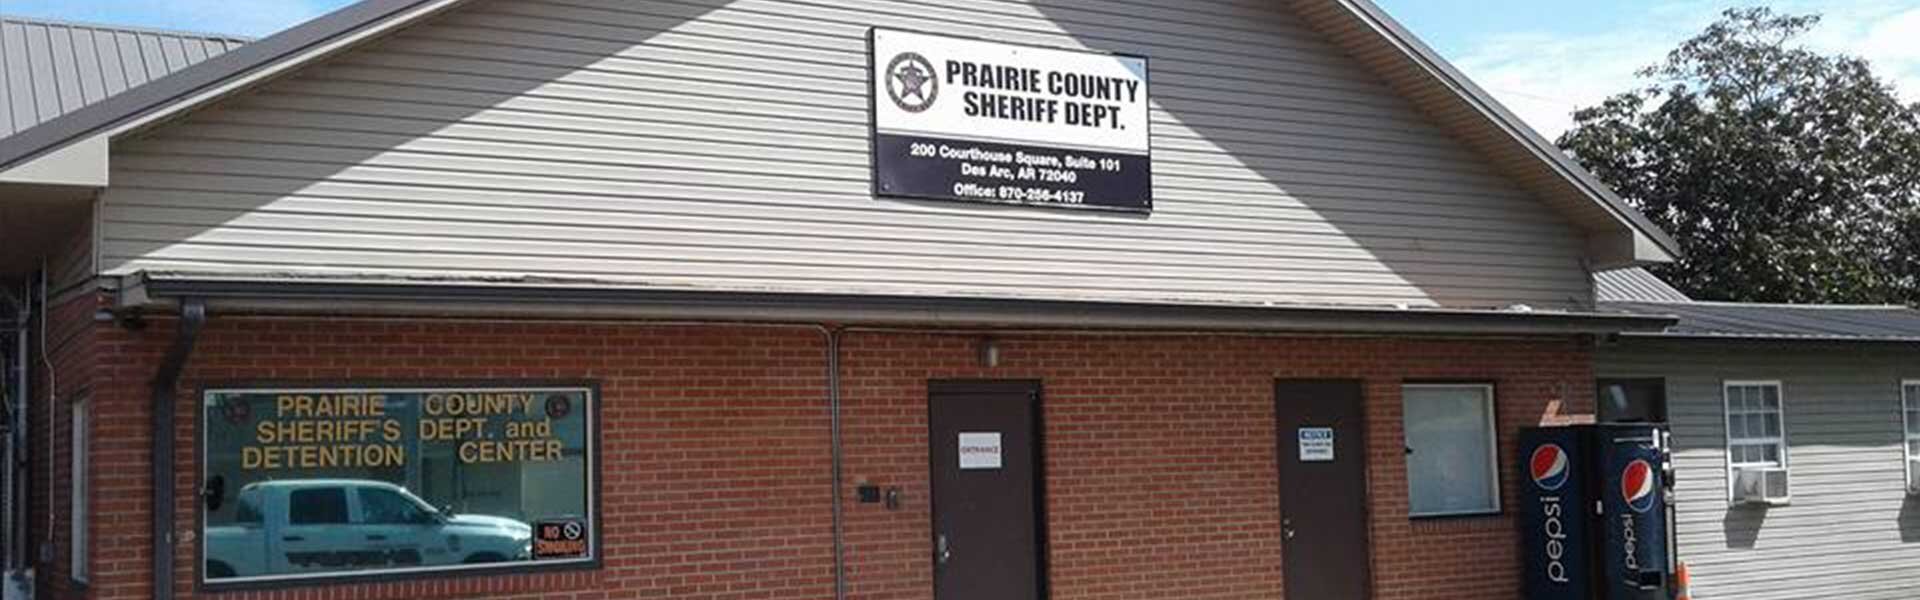 Prairie County Sheriff Department main office building.